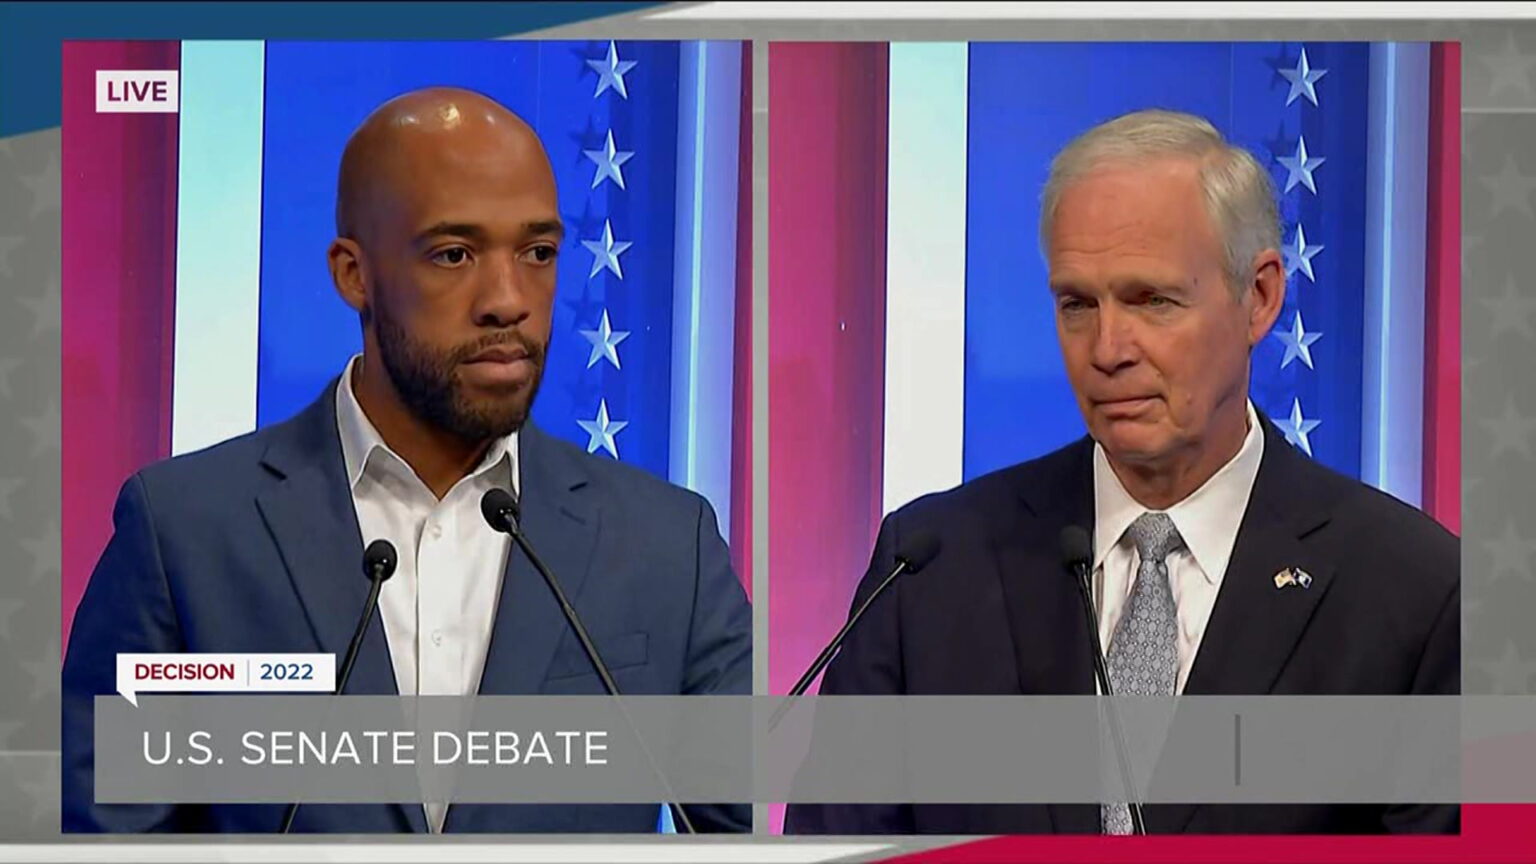 A split screen shows Mandela Barnes and Ron Johnson in different areas of a stage set.